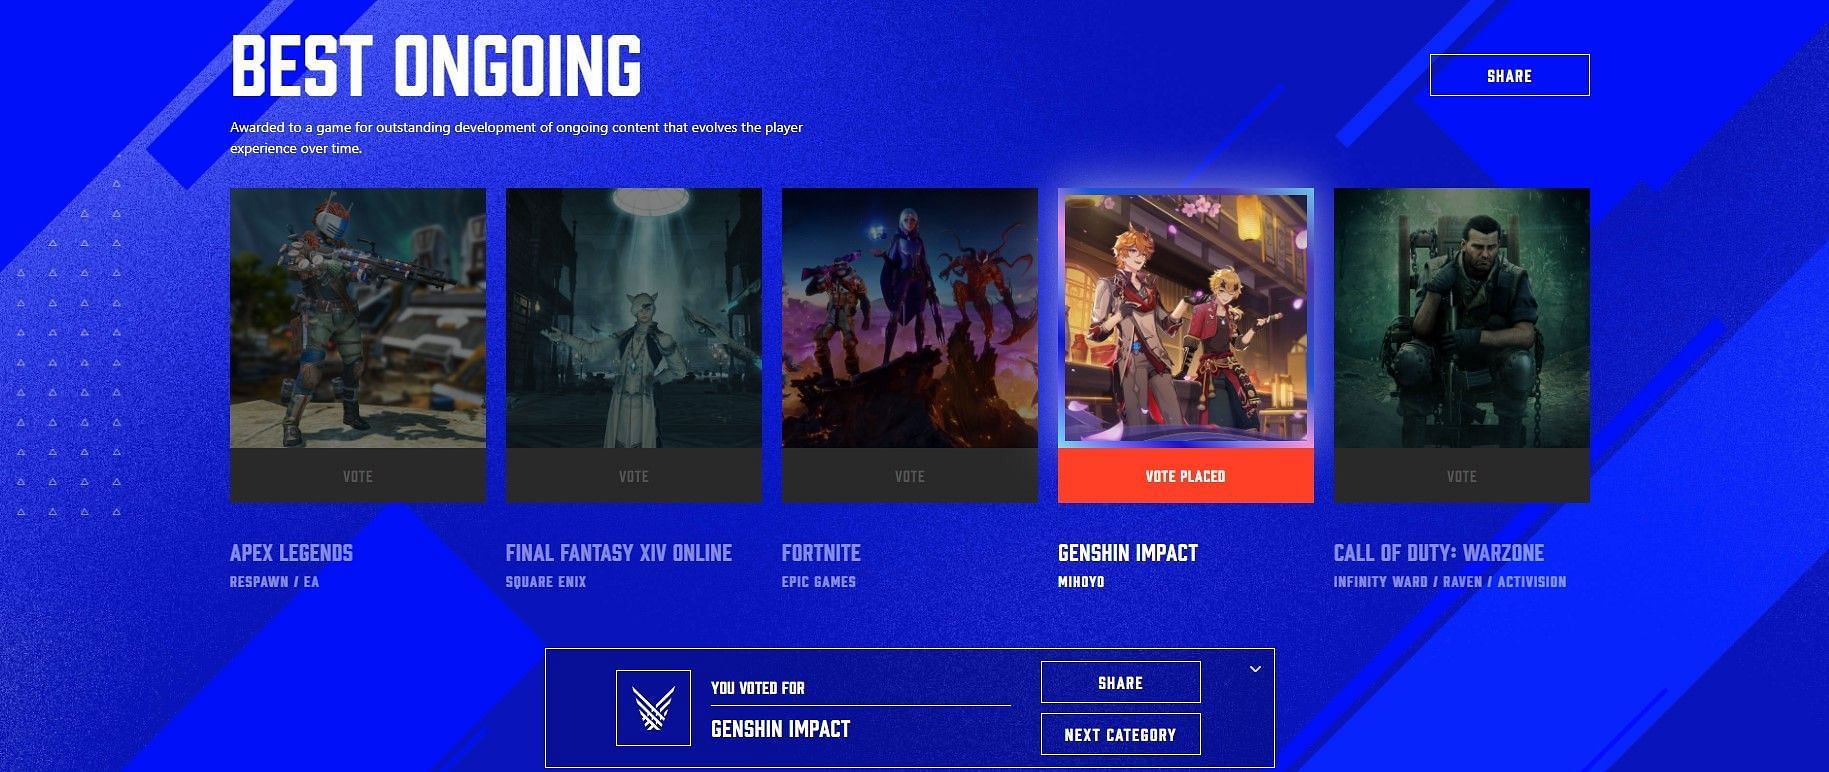 An example of a player voting for Genshin Impact (Image via The Game Awards 2021)